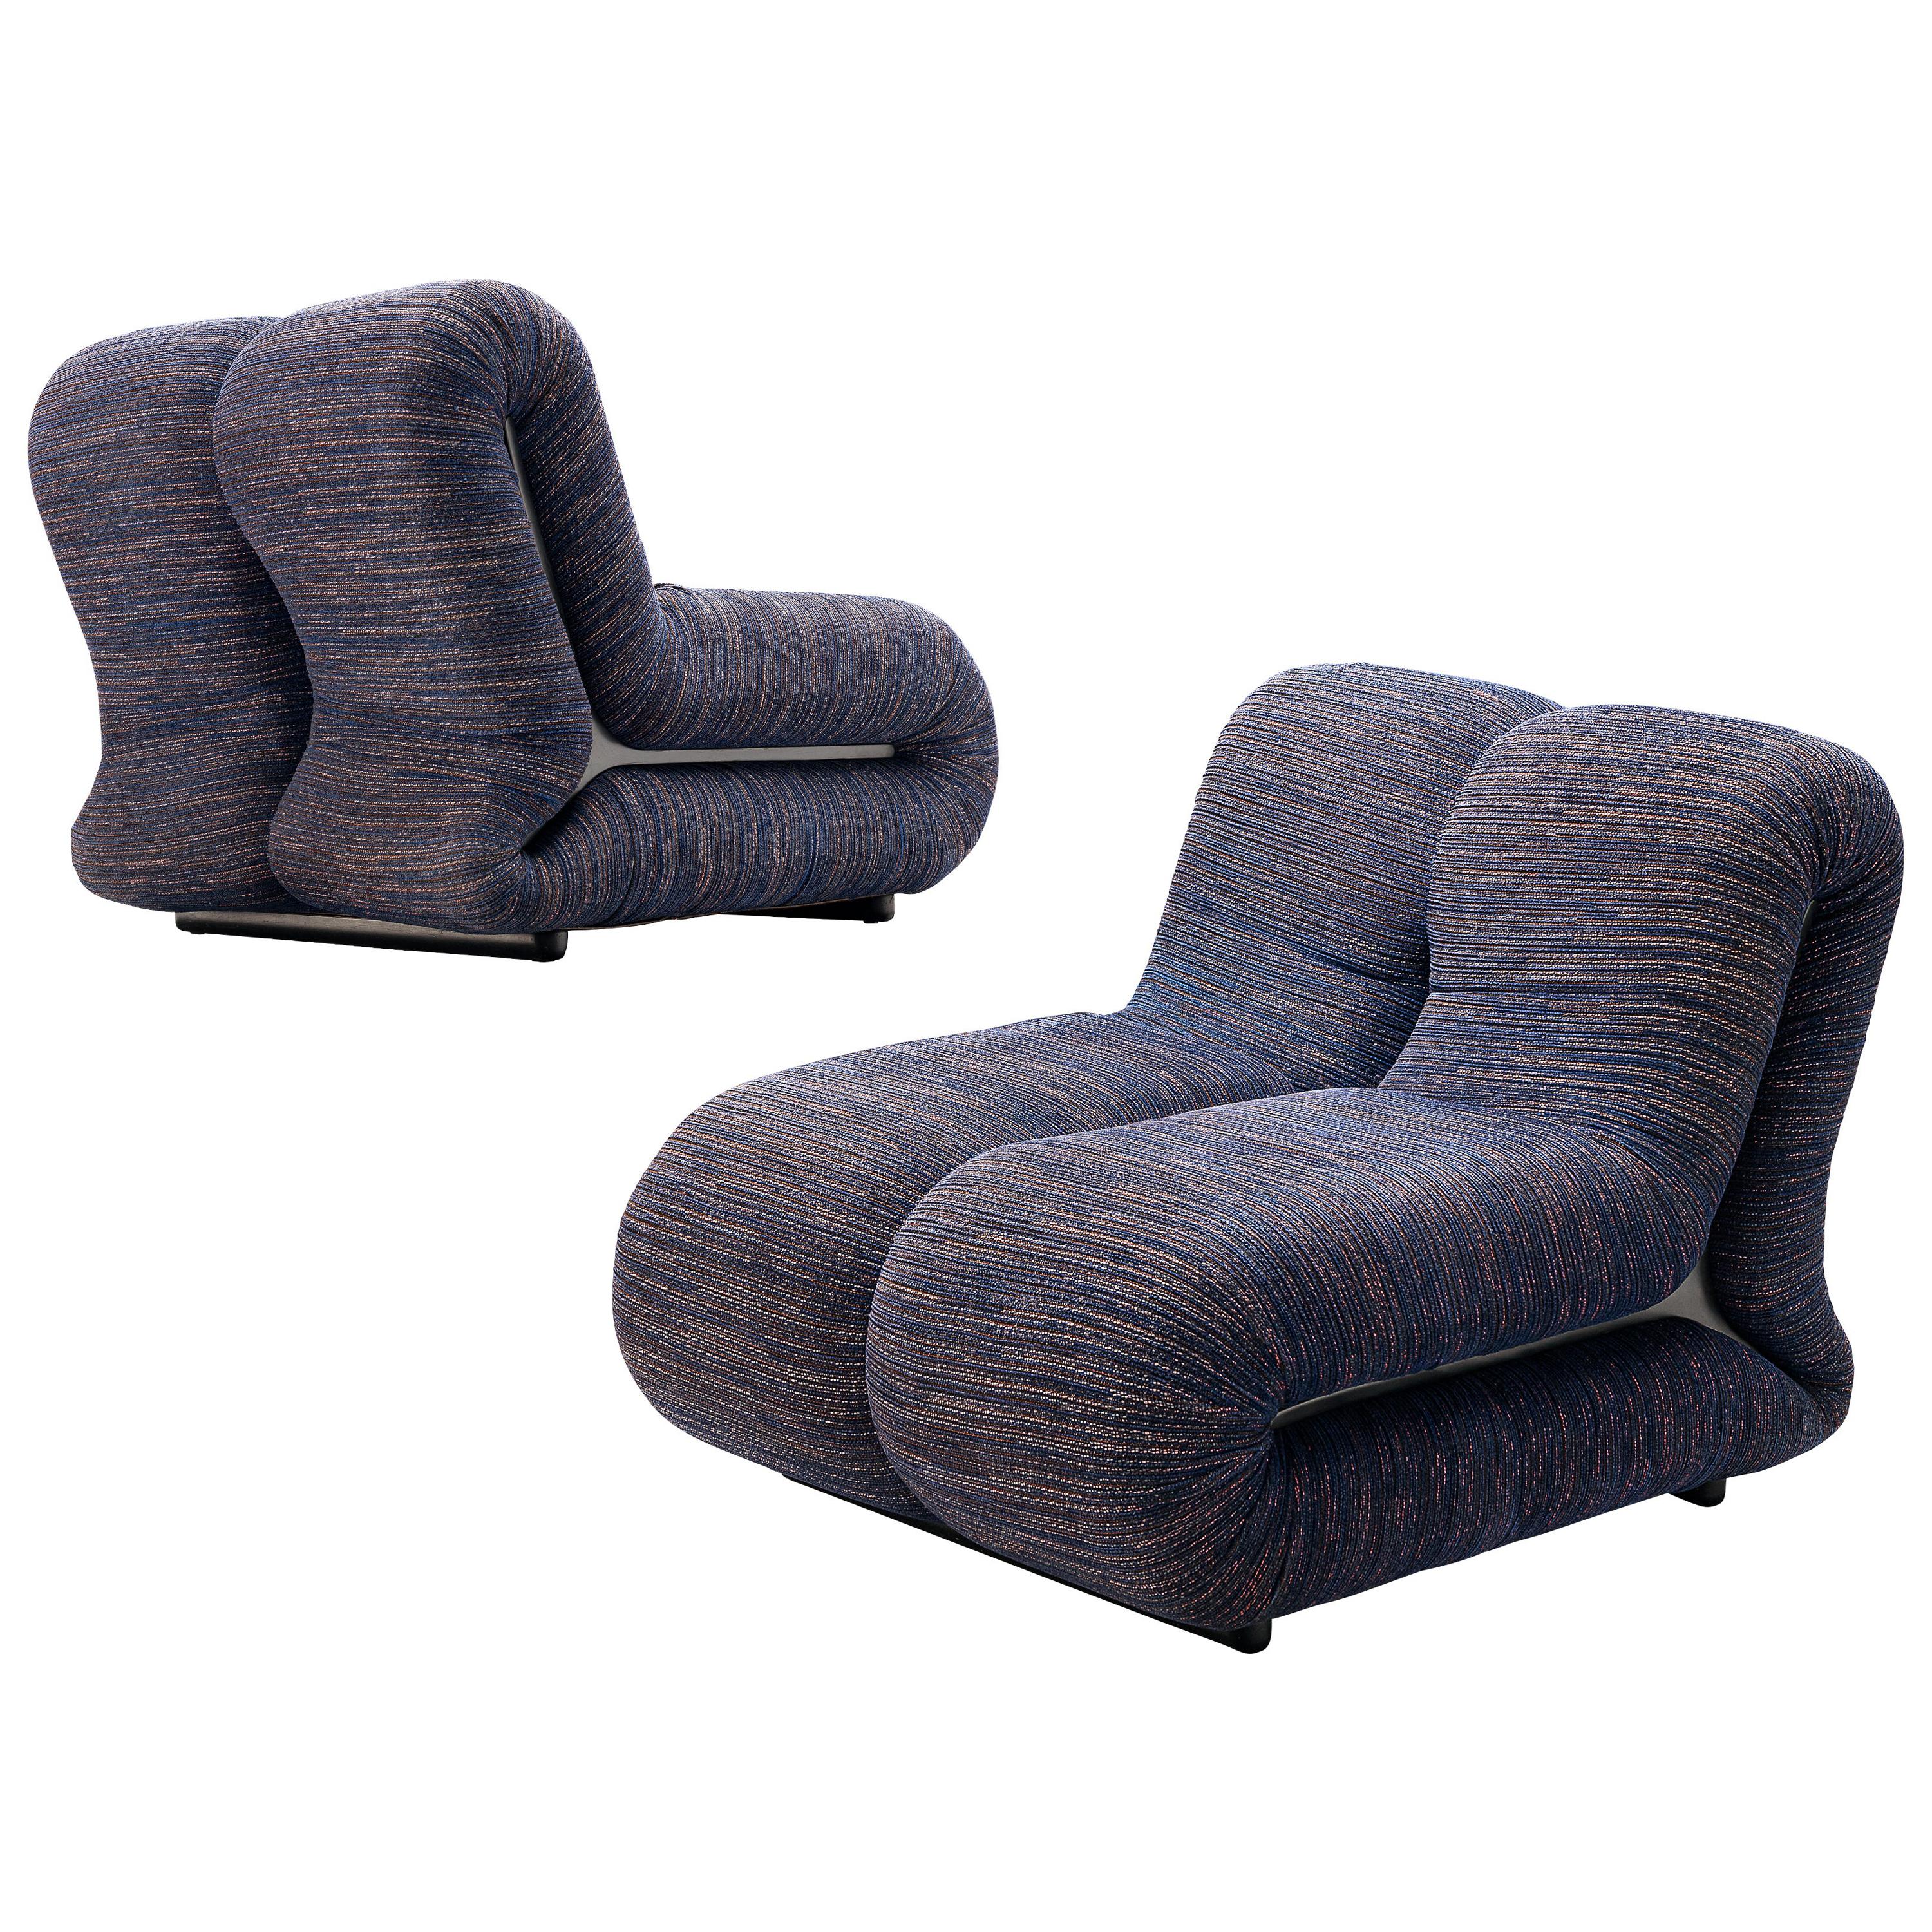 Claudio Vagnoni for 1P Pair of 'Pagru' Lounge Chairs in Blue Upholstery